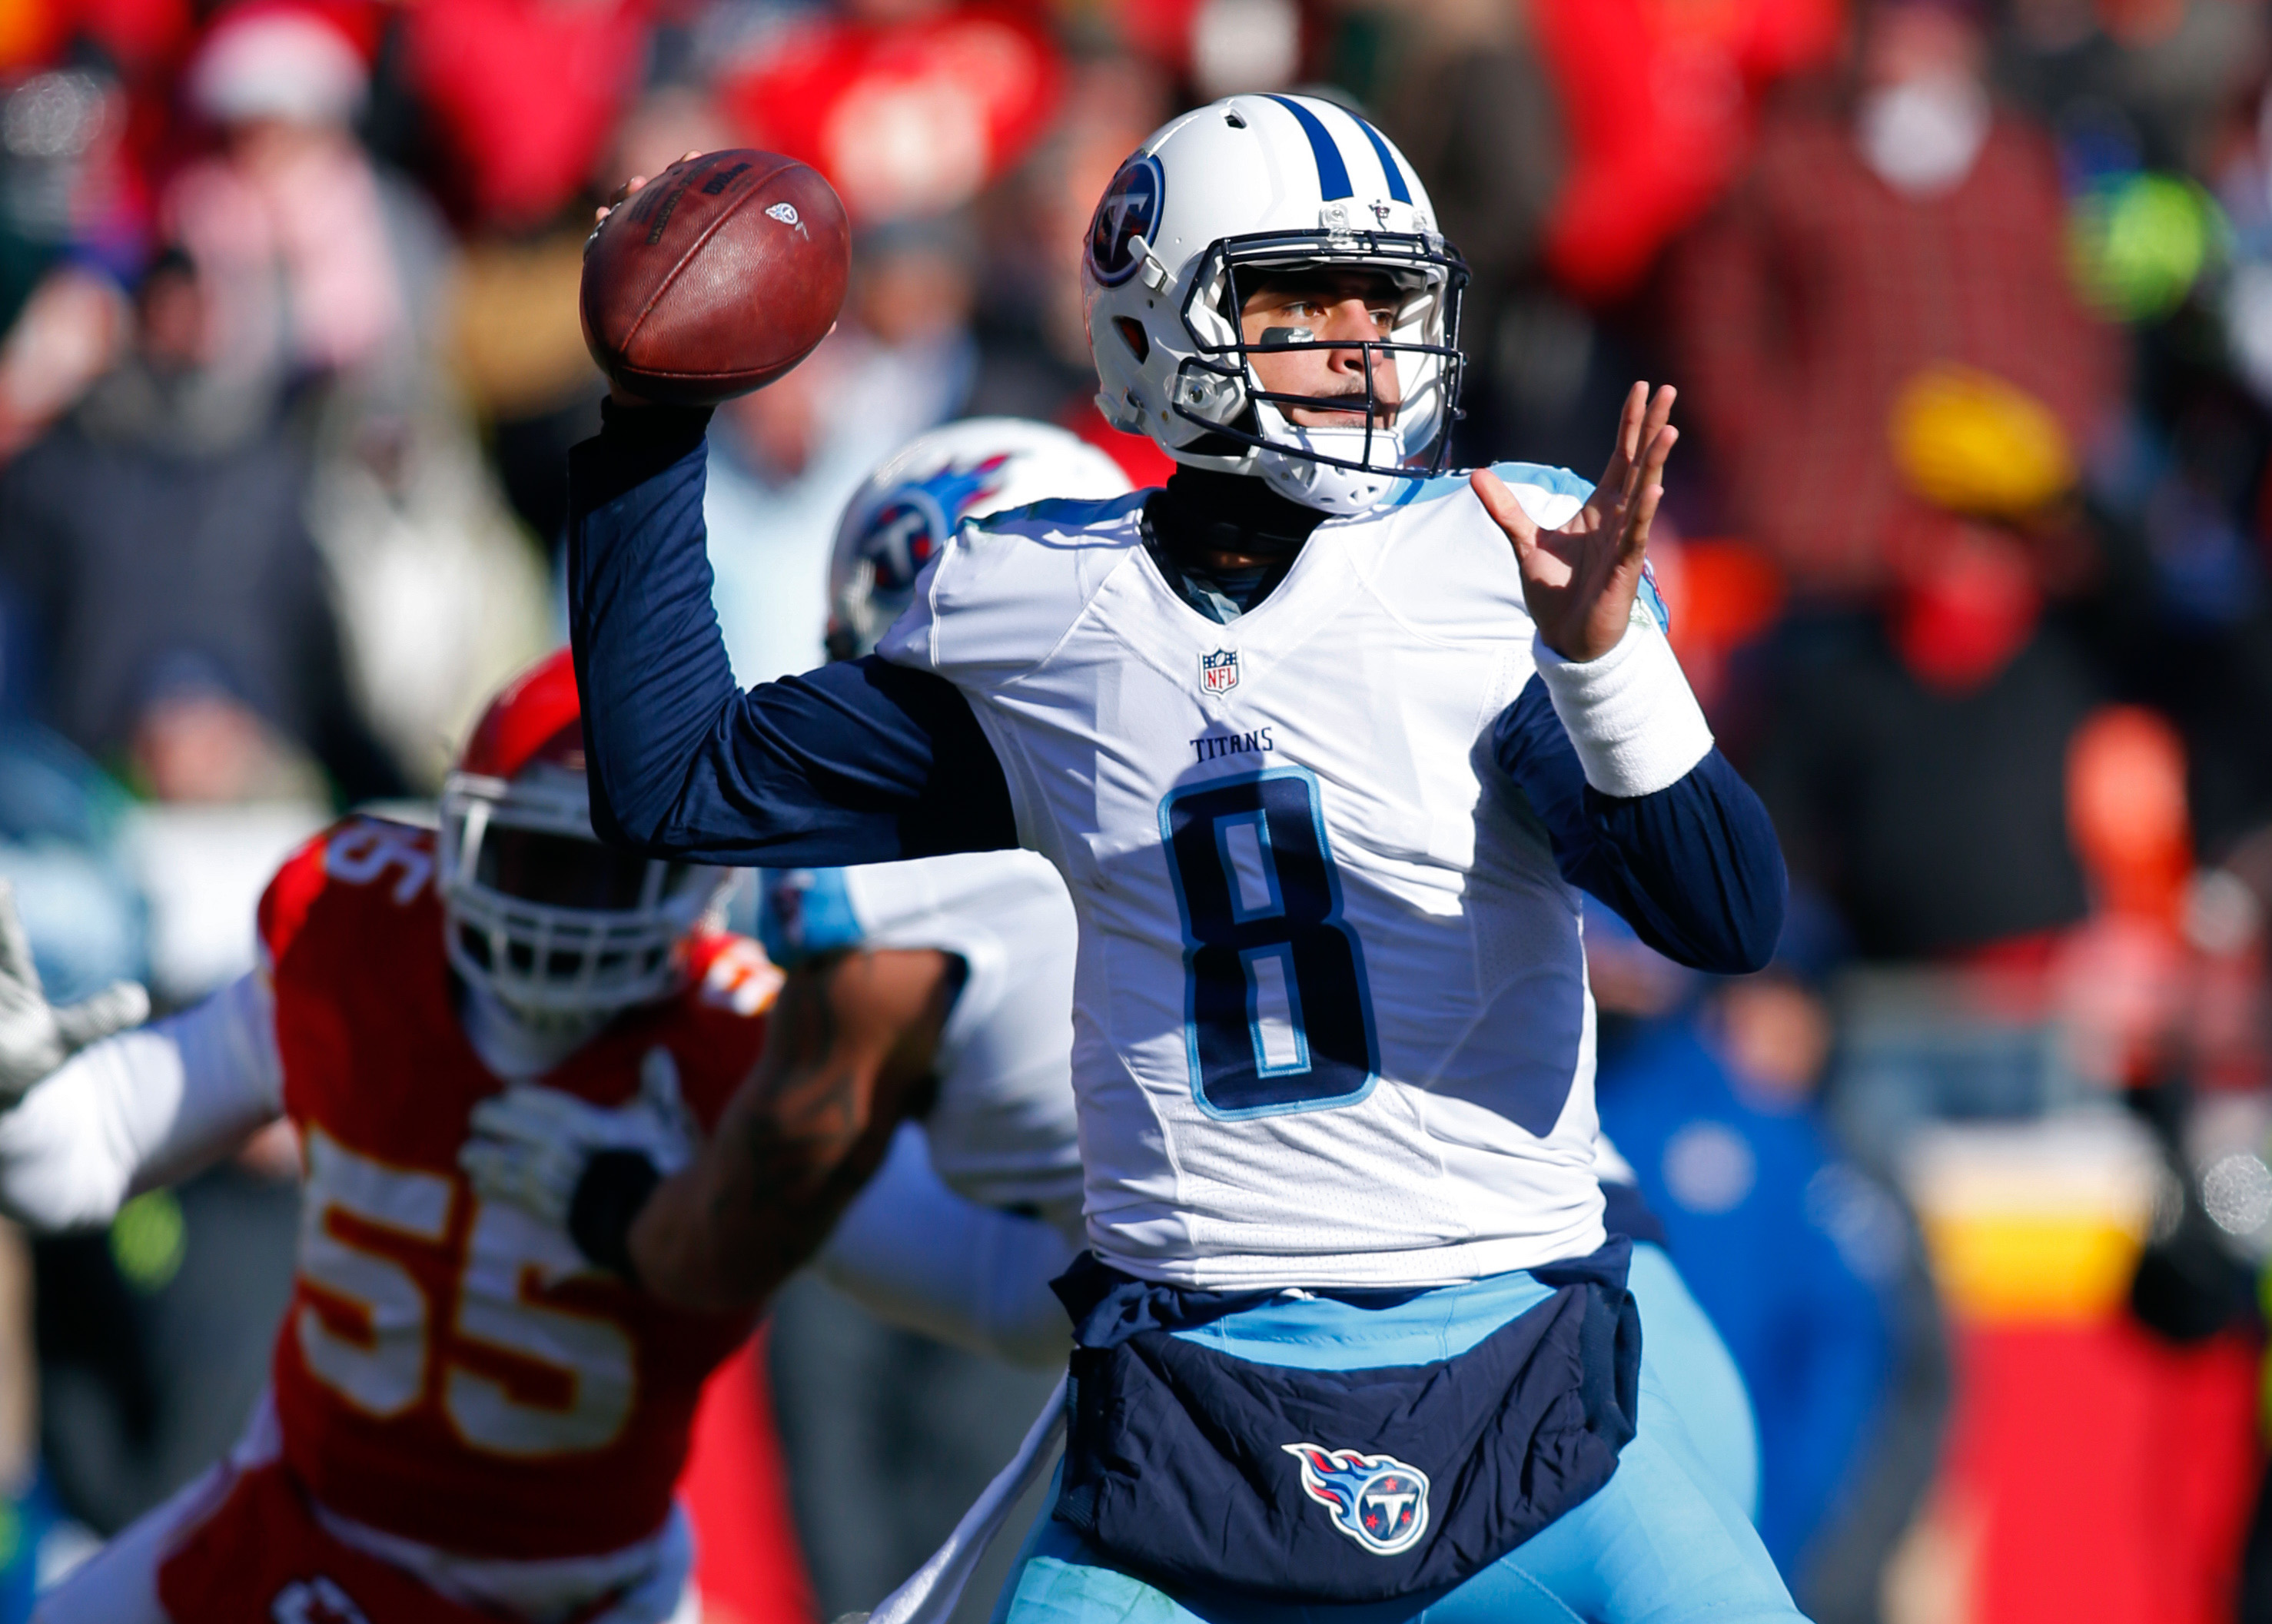 Tennessee Titans 2017 Schedule Loaded With Winnable Games For Marcus Mariota and Company